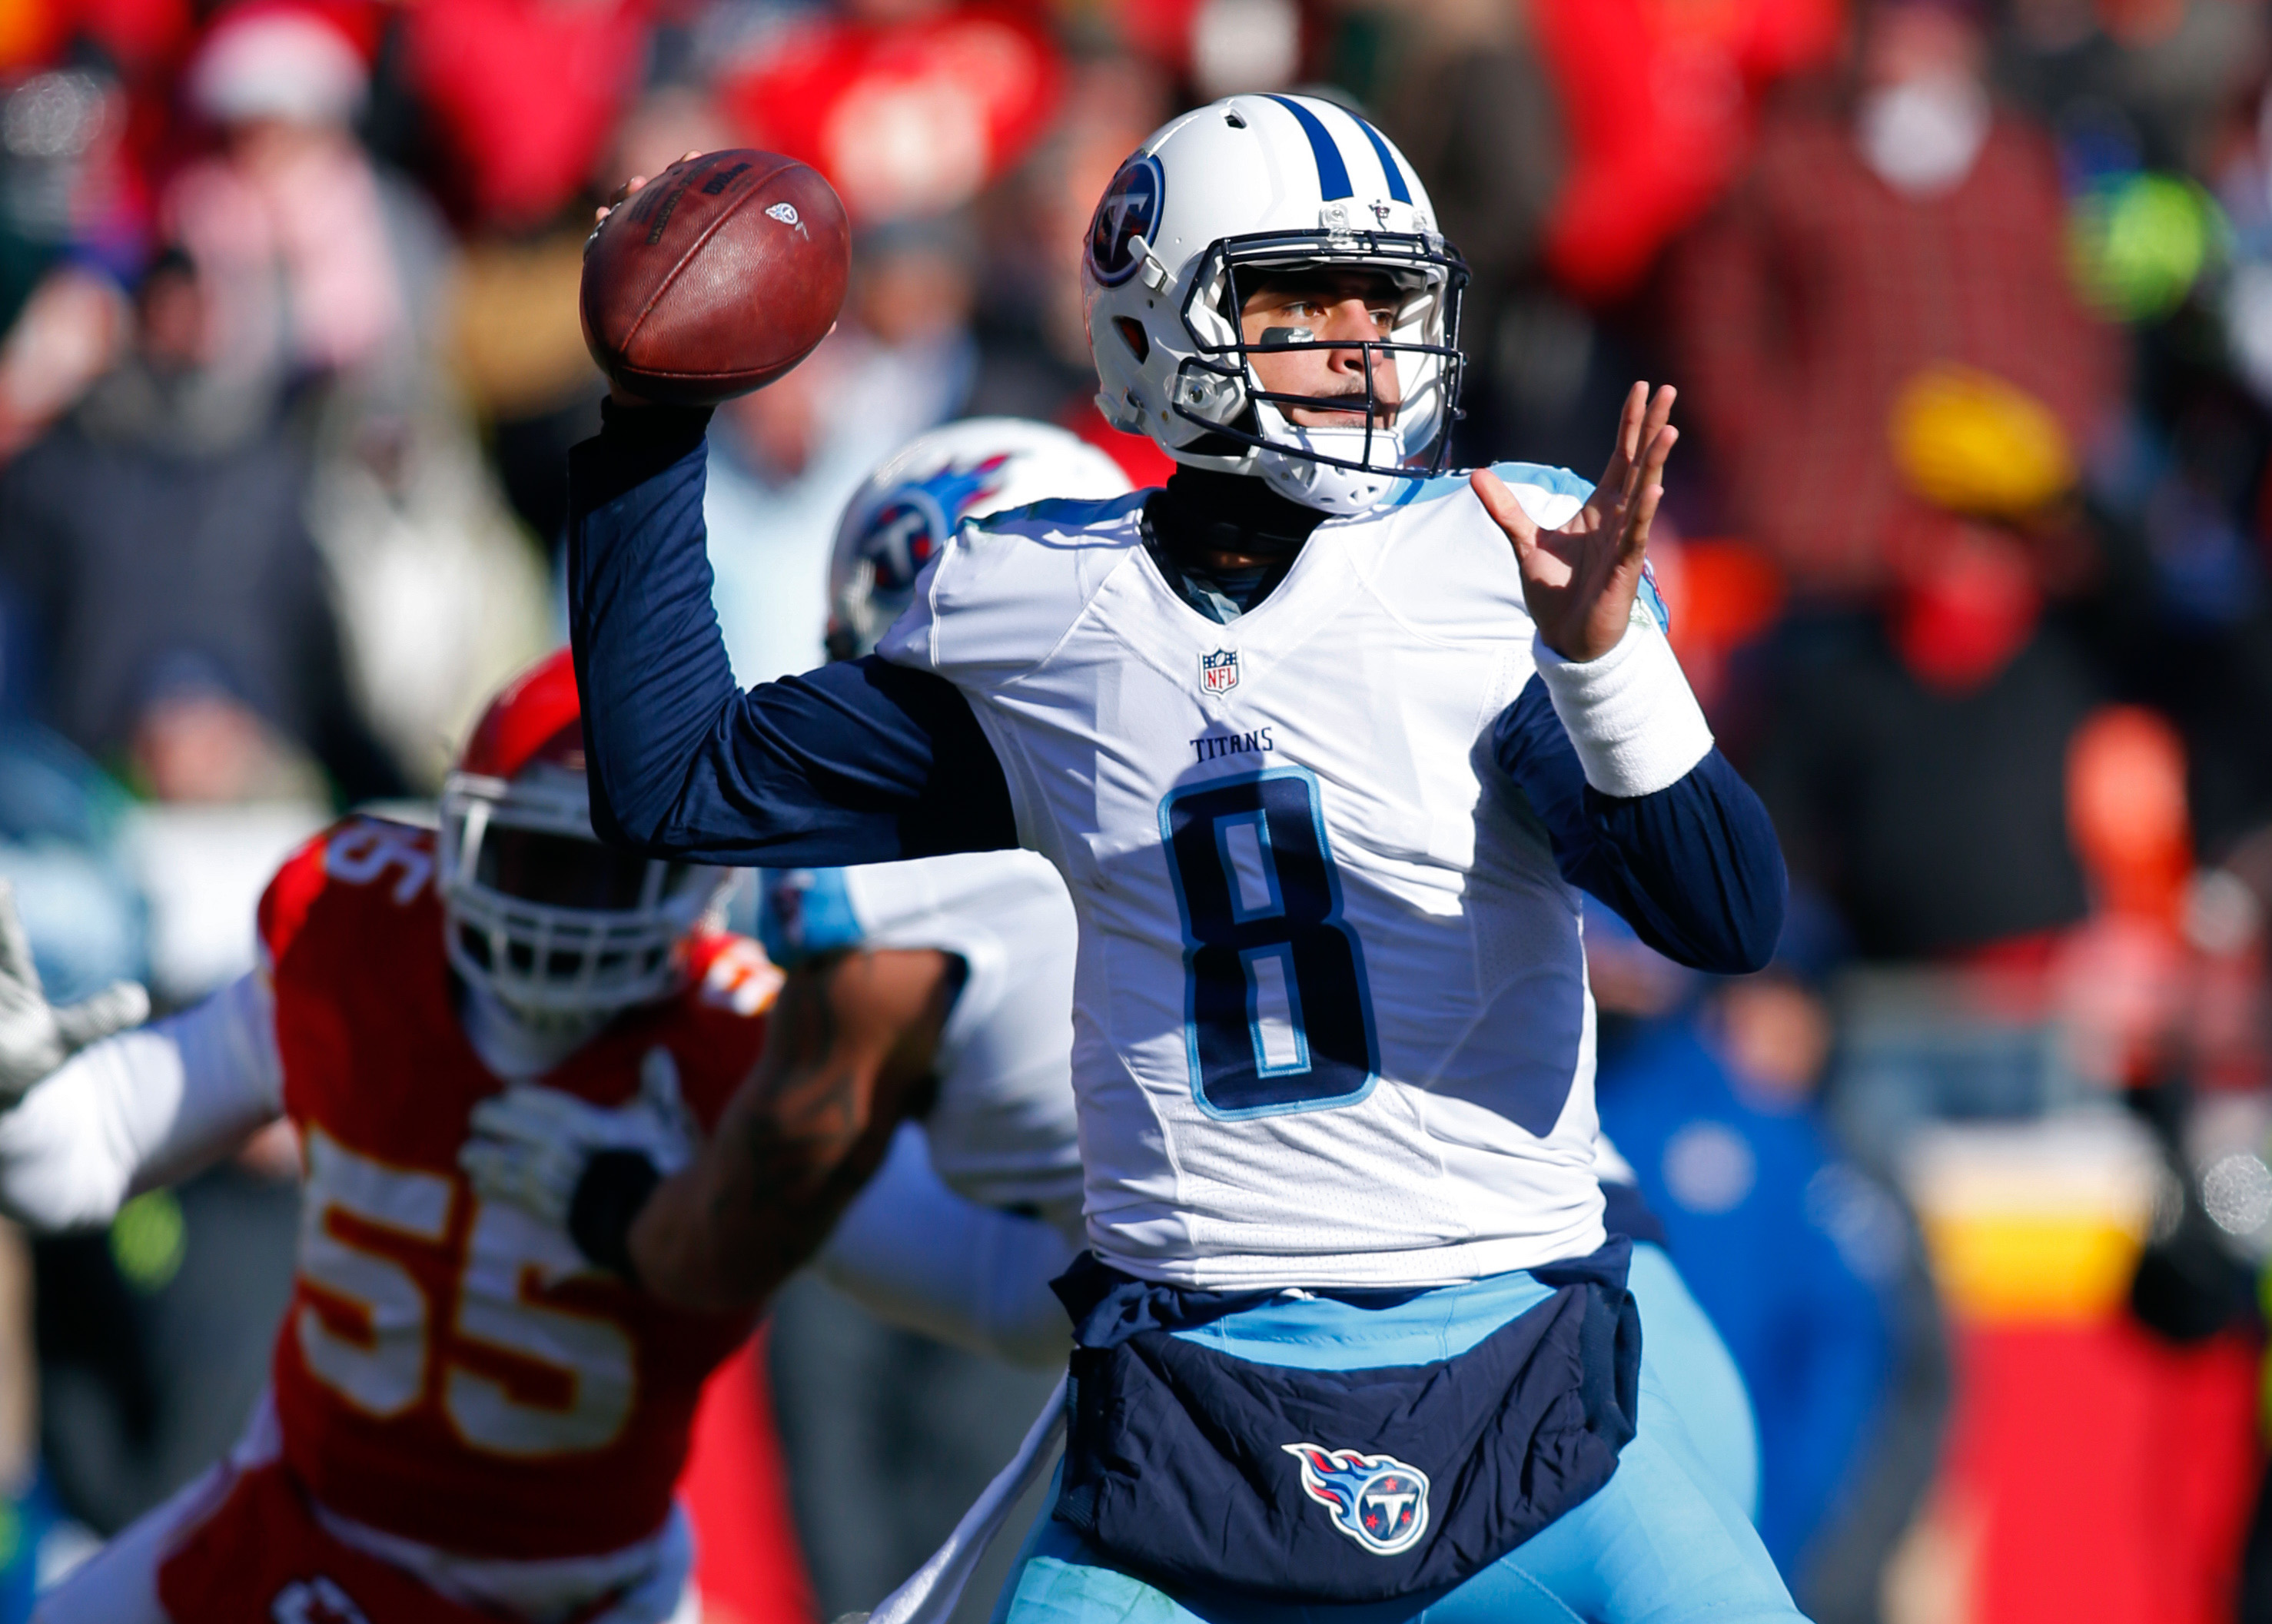 Tennessee Titans 2017 Schedule Loaded With Winnable Games For Marcus Mariota and Company